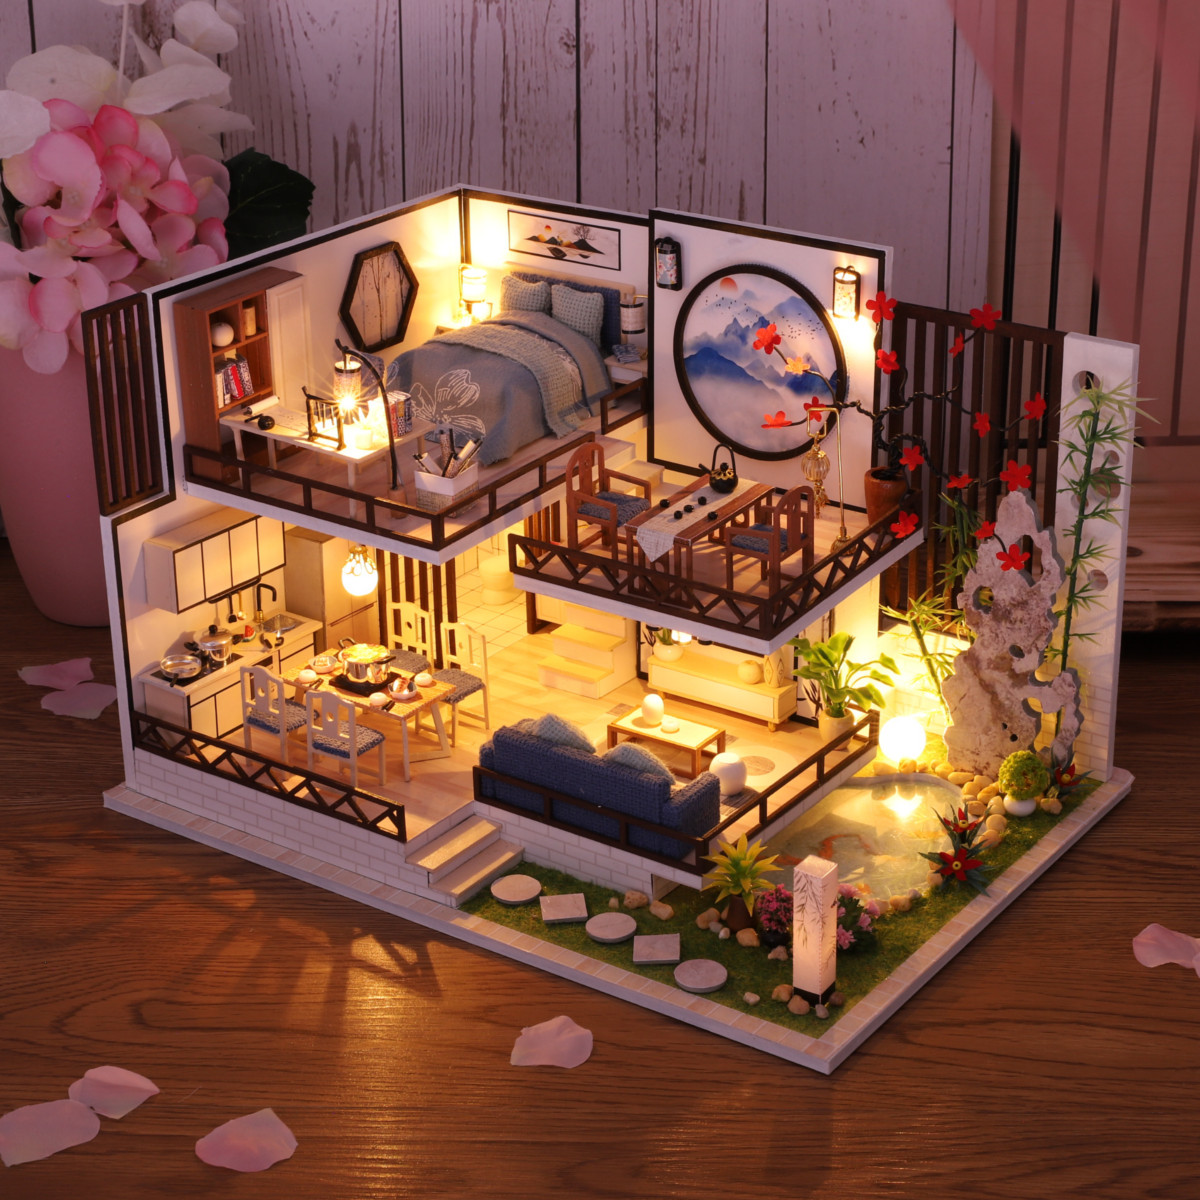 M-029-Chinese-Style-Wooden-DIY-Handmade-Assemble-Doll-House-Miniature-Furniture-Kit-with-LED-Effect--1838455-4